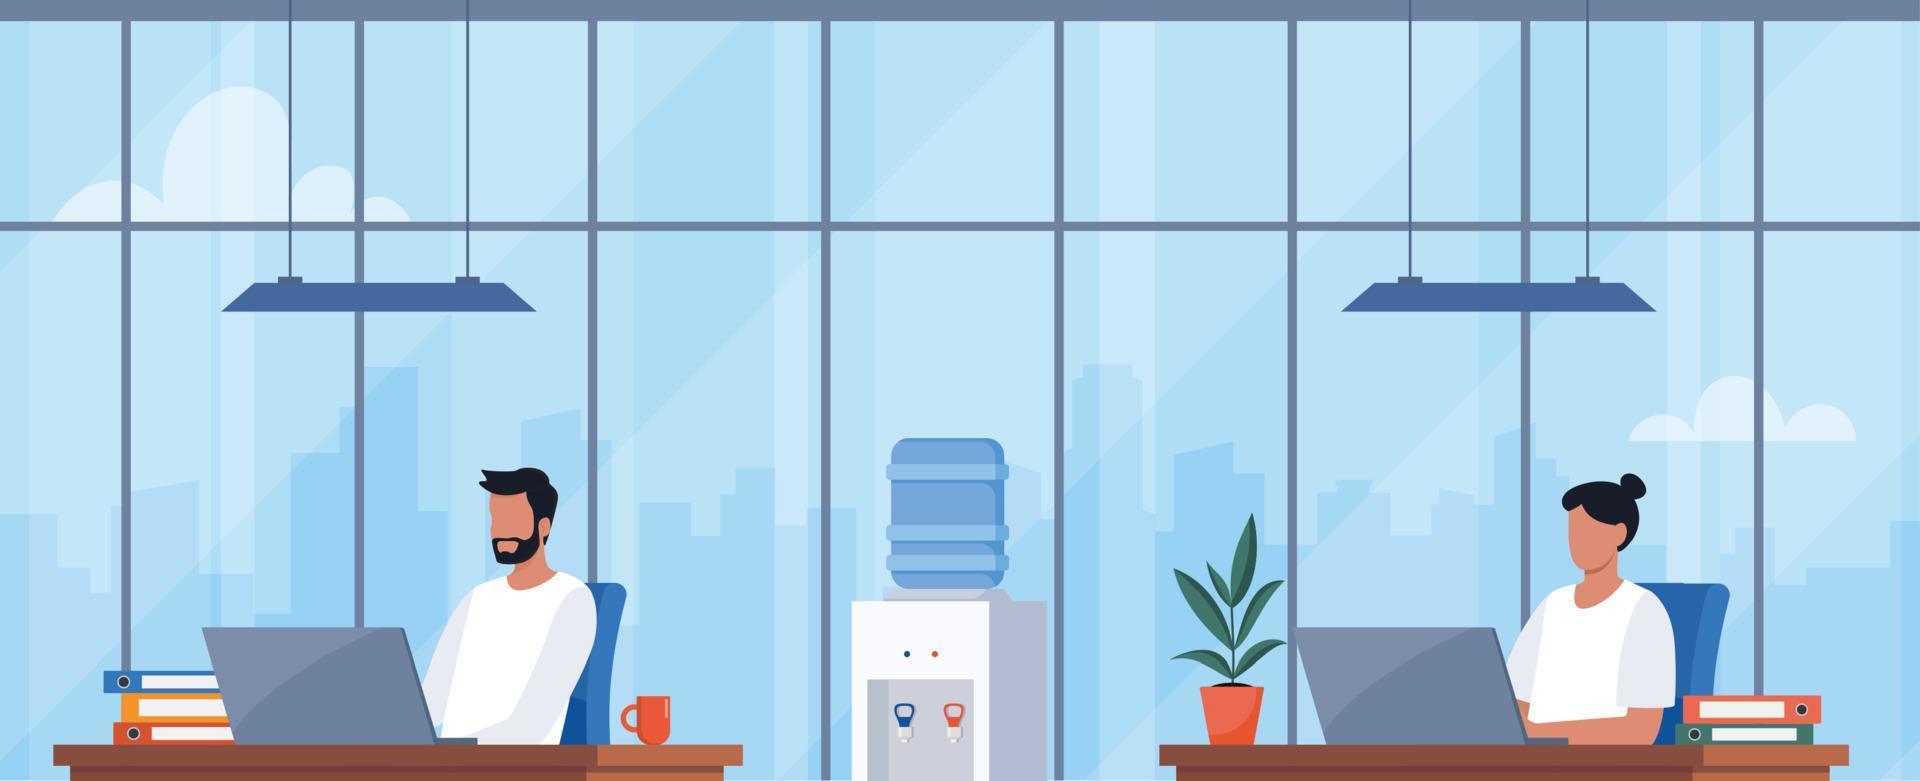 People working in office. Man and woman sitting at desks with laptops. Workplace with modern interior. Daily routine. Everyday company life. Colorful flat vector illustration.